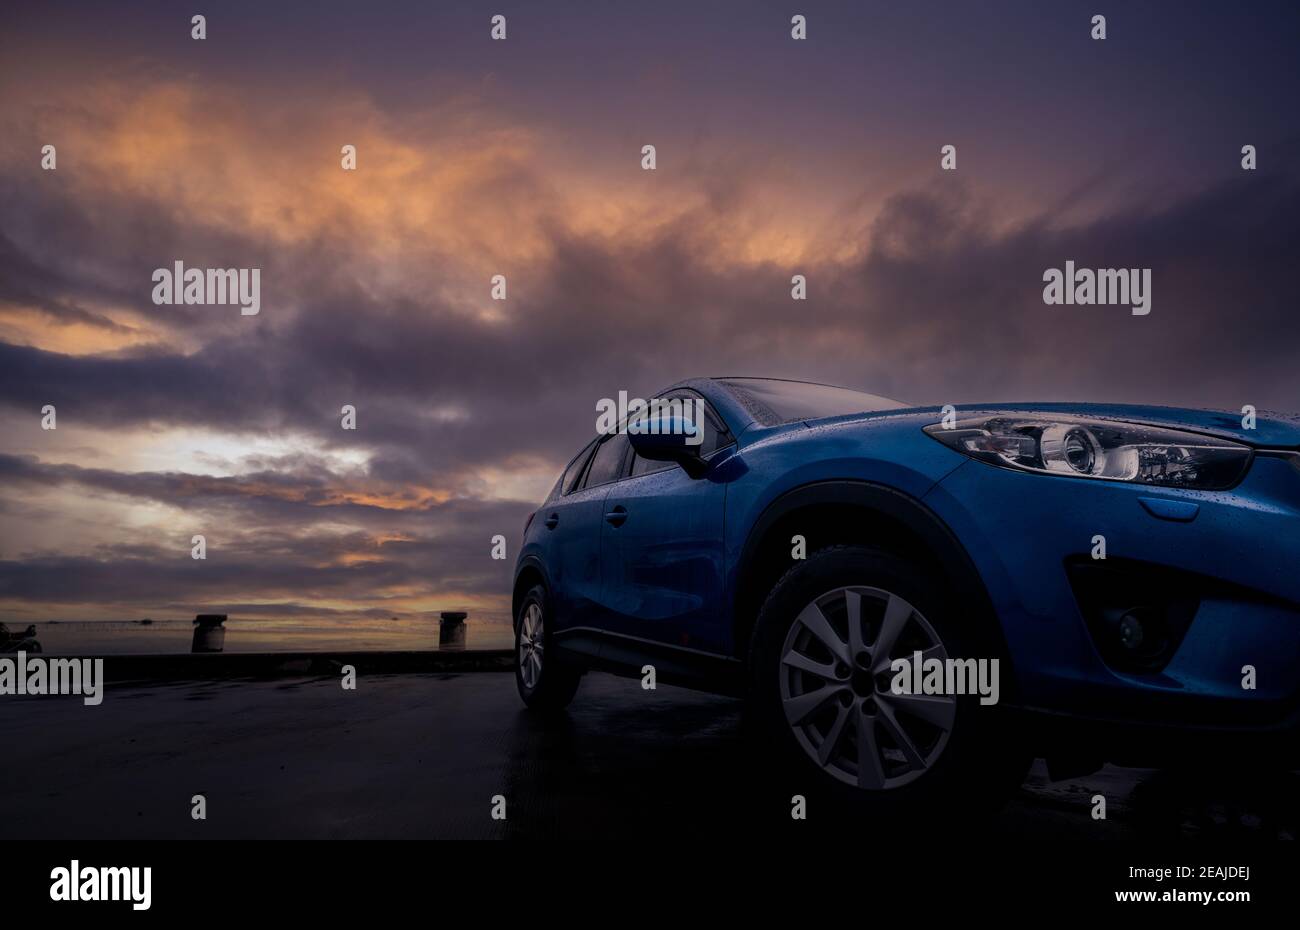 Luxury SUV car with raindrops. Front view new blue SUV car parked on concrete parking lot near sea beach with sunset sky. Electric vehicle concept. Road trip travel. Car covered with water drops. Stock Photo